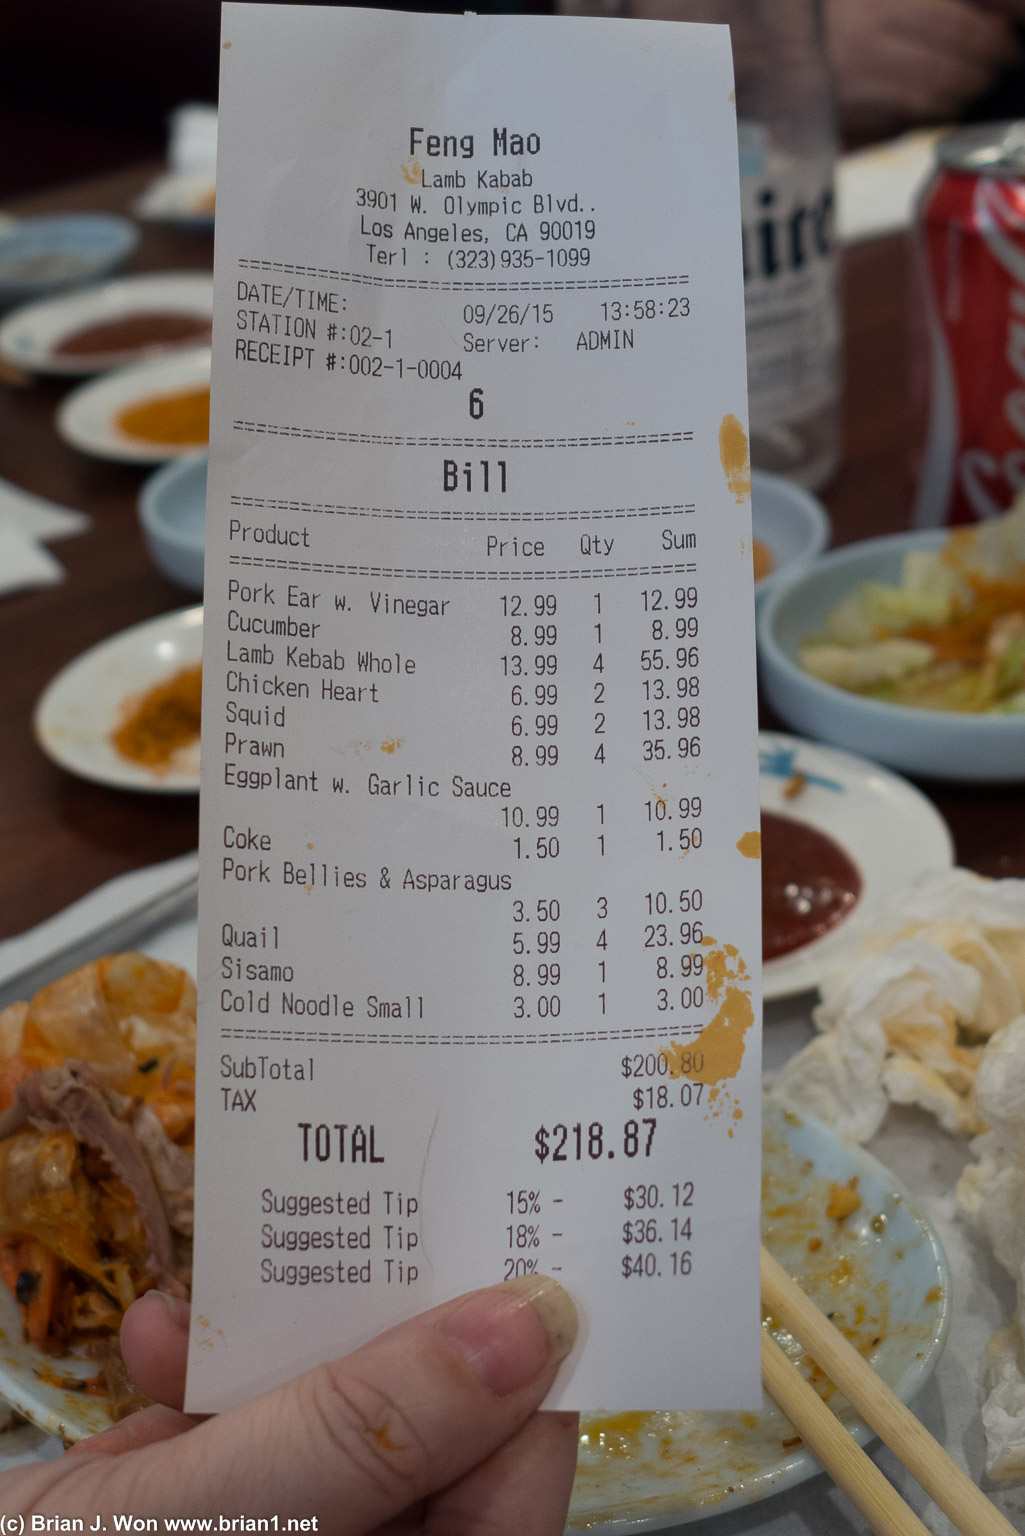 Of course everything is covered in BBQ, including the bill.